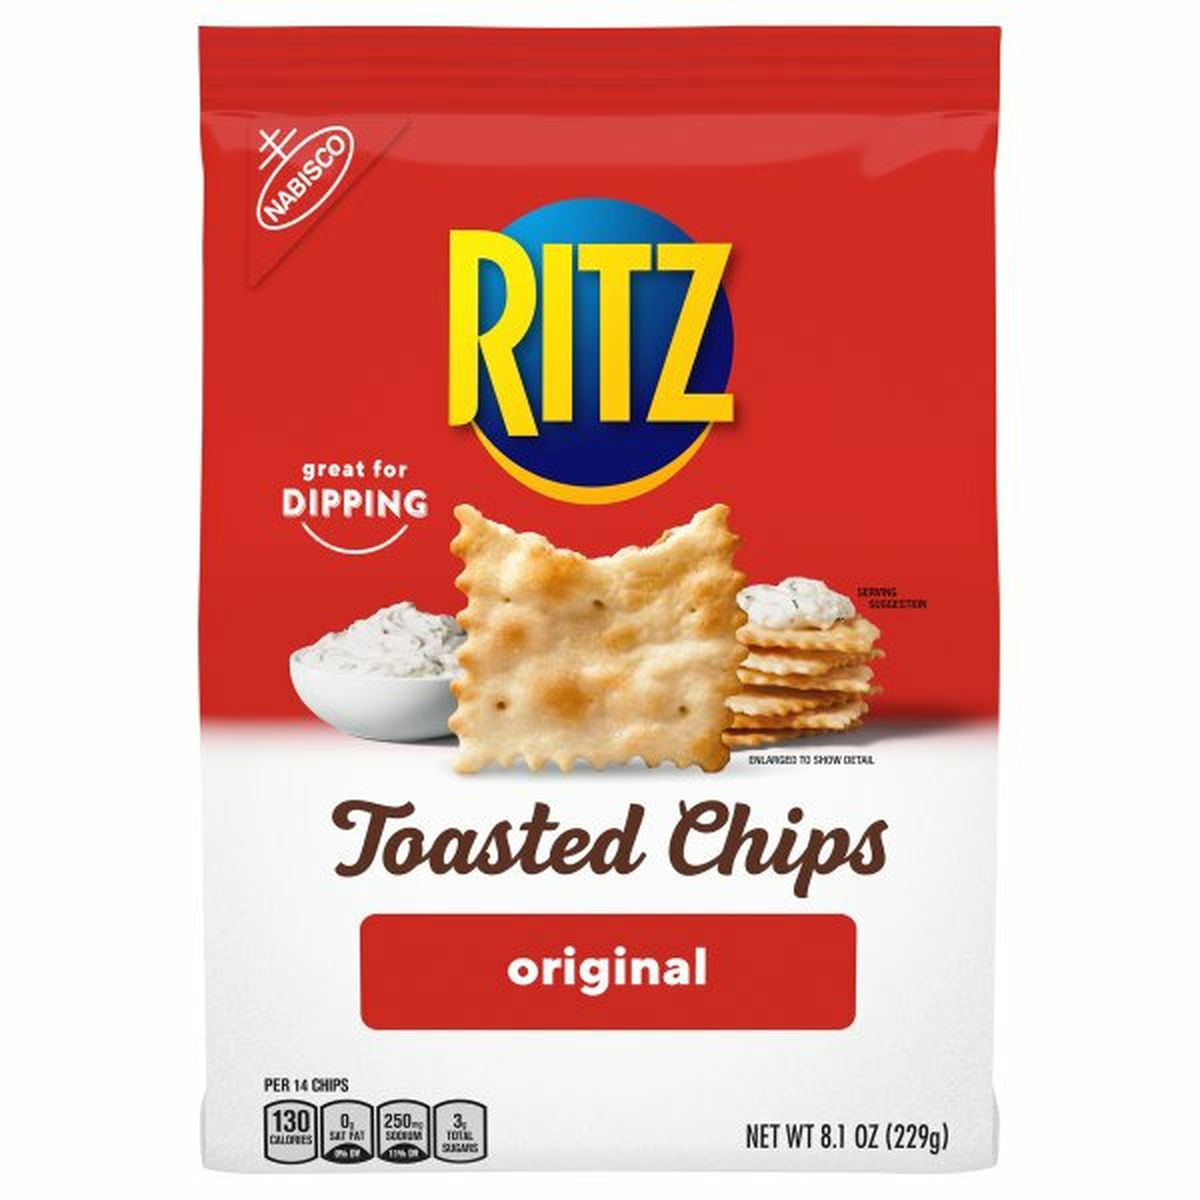 Calories in Ritz Toasted Chips, Original